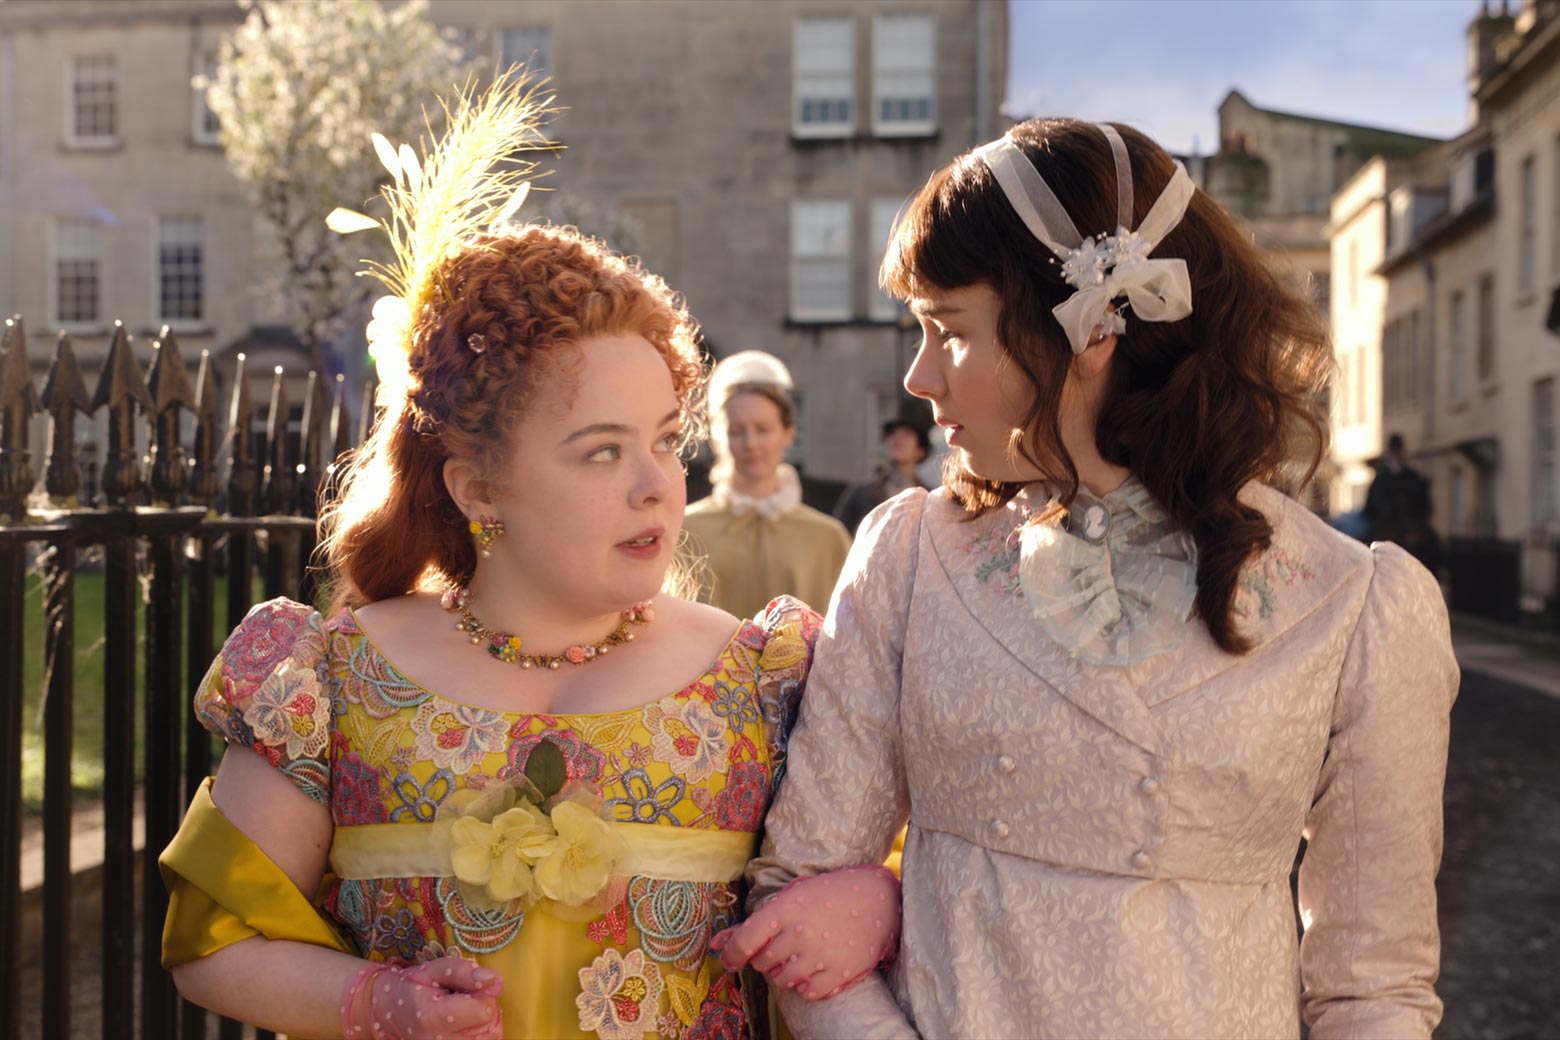 Two women in period dress link arms as they walk outside.